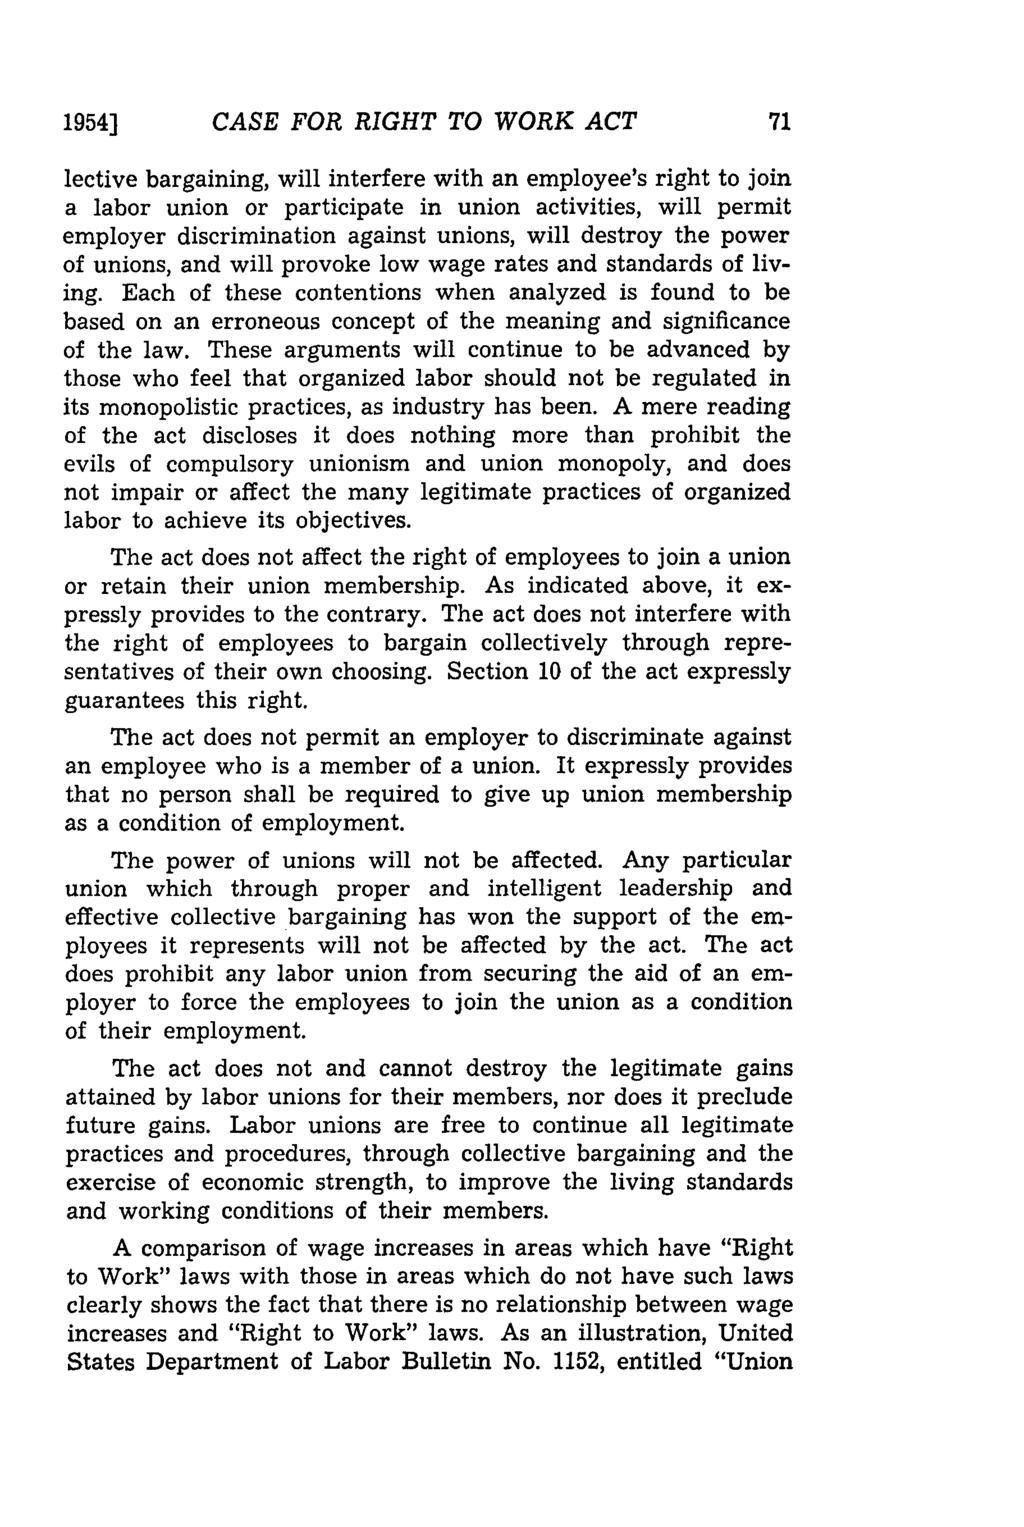 1954] CASE FOR RIGHT TO WORK ACT lective bargaining, will interfere with an employee's right to join a labor union or participate in union activities, will permit employer discrimination against